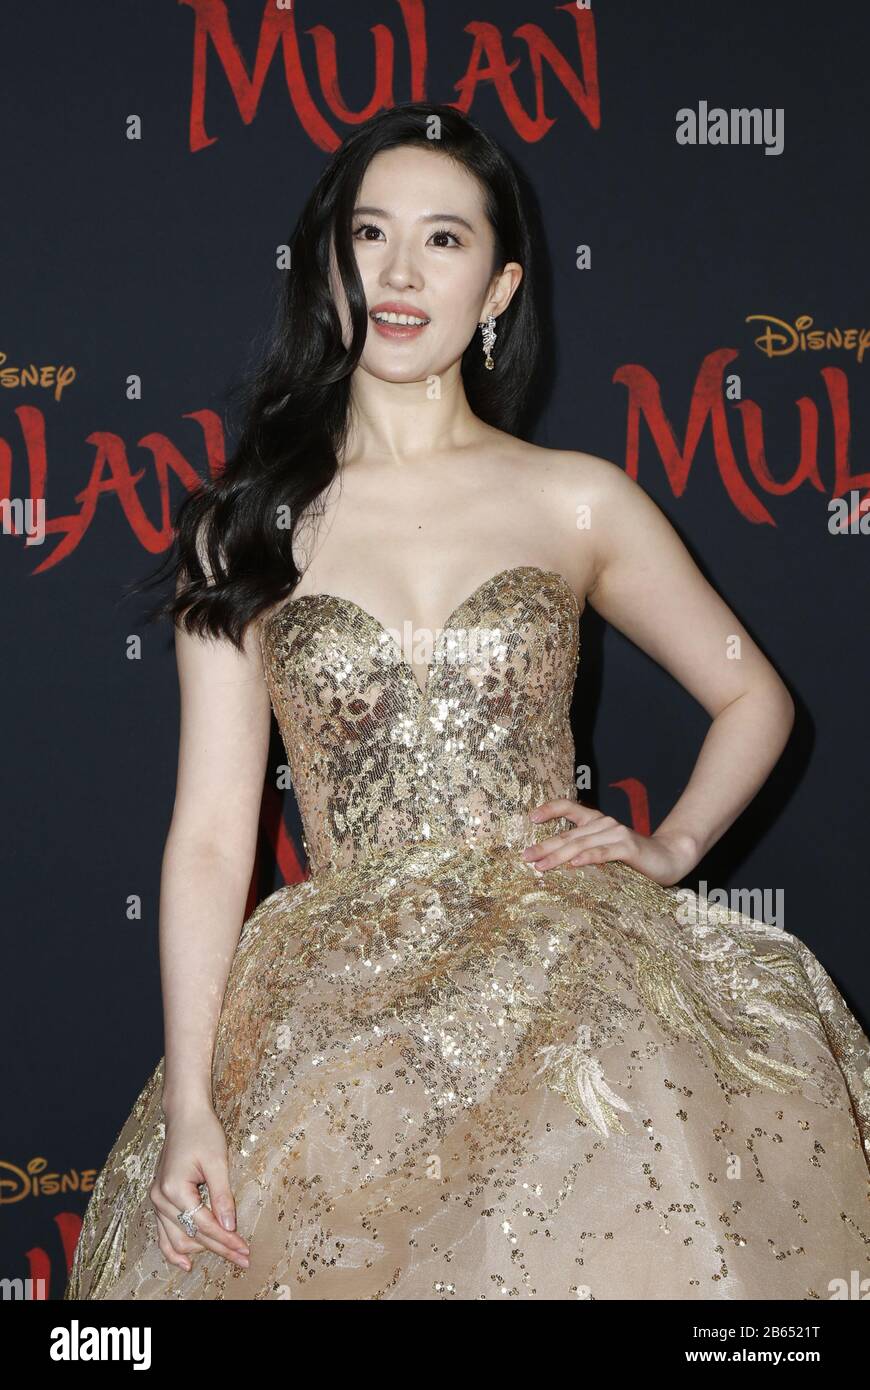 Hollywood, Ca. 9th Mar, 2020. Yifei Liu, at Premiere Of Disney's 'Mulan' at The Dolby Theatre in Hollywood California on March 9, 2020. Credit: Faye Sadou/Media Punch/Alamy Live News Stock Photo